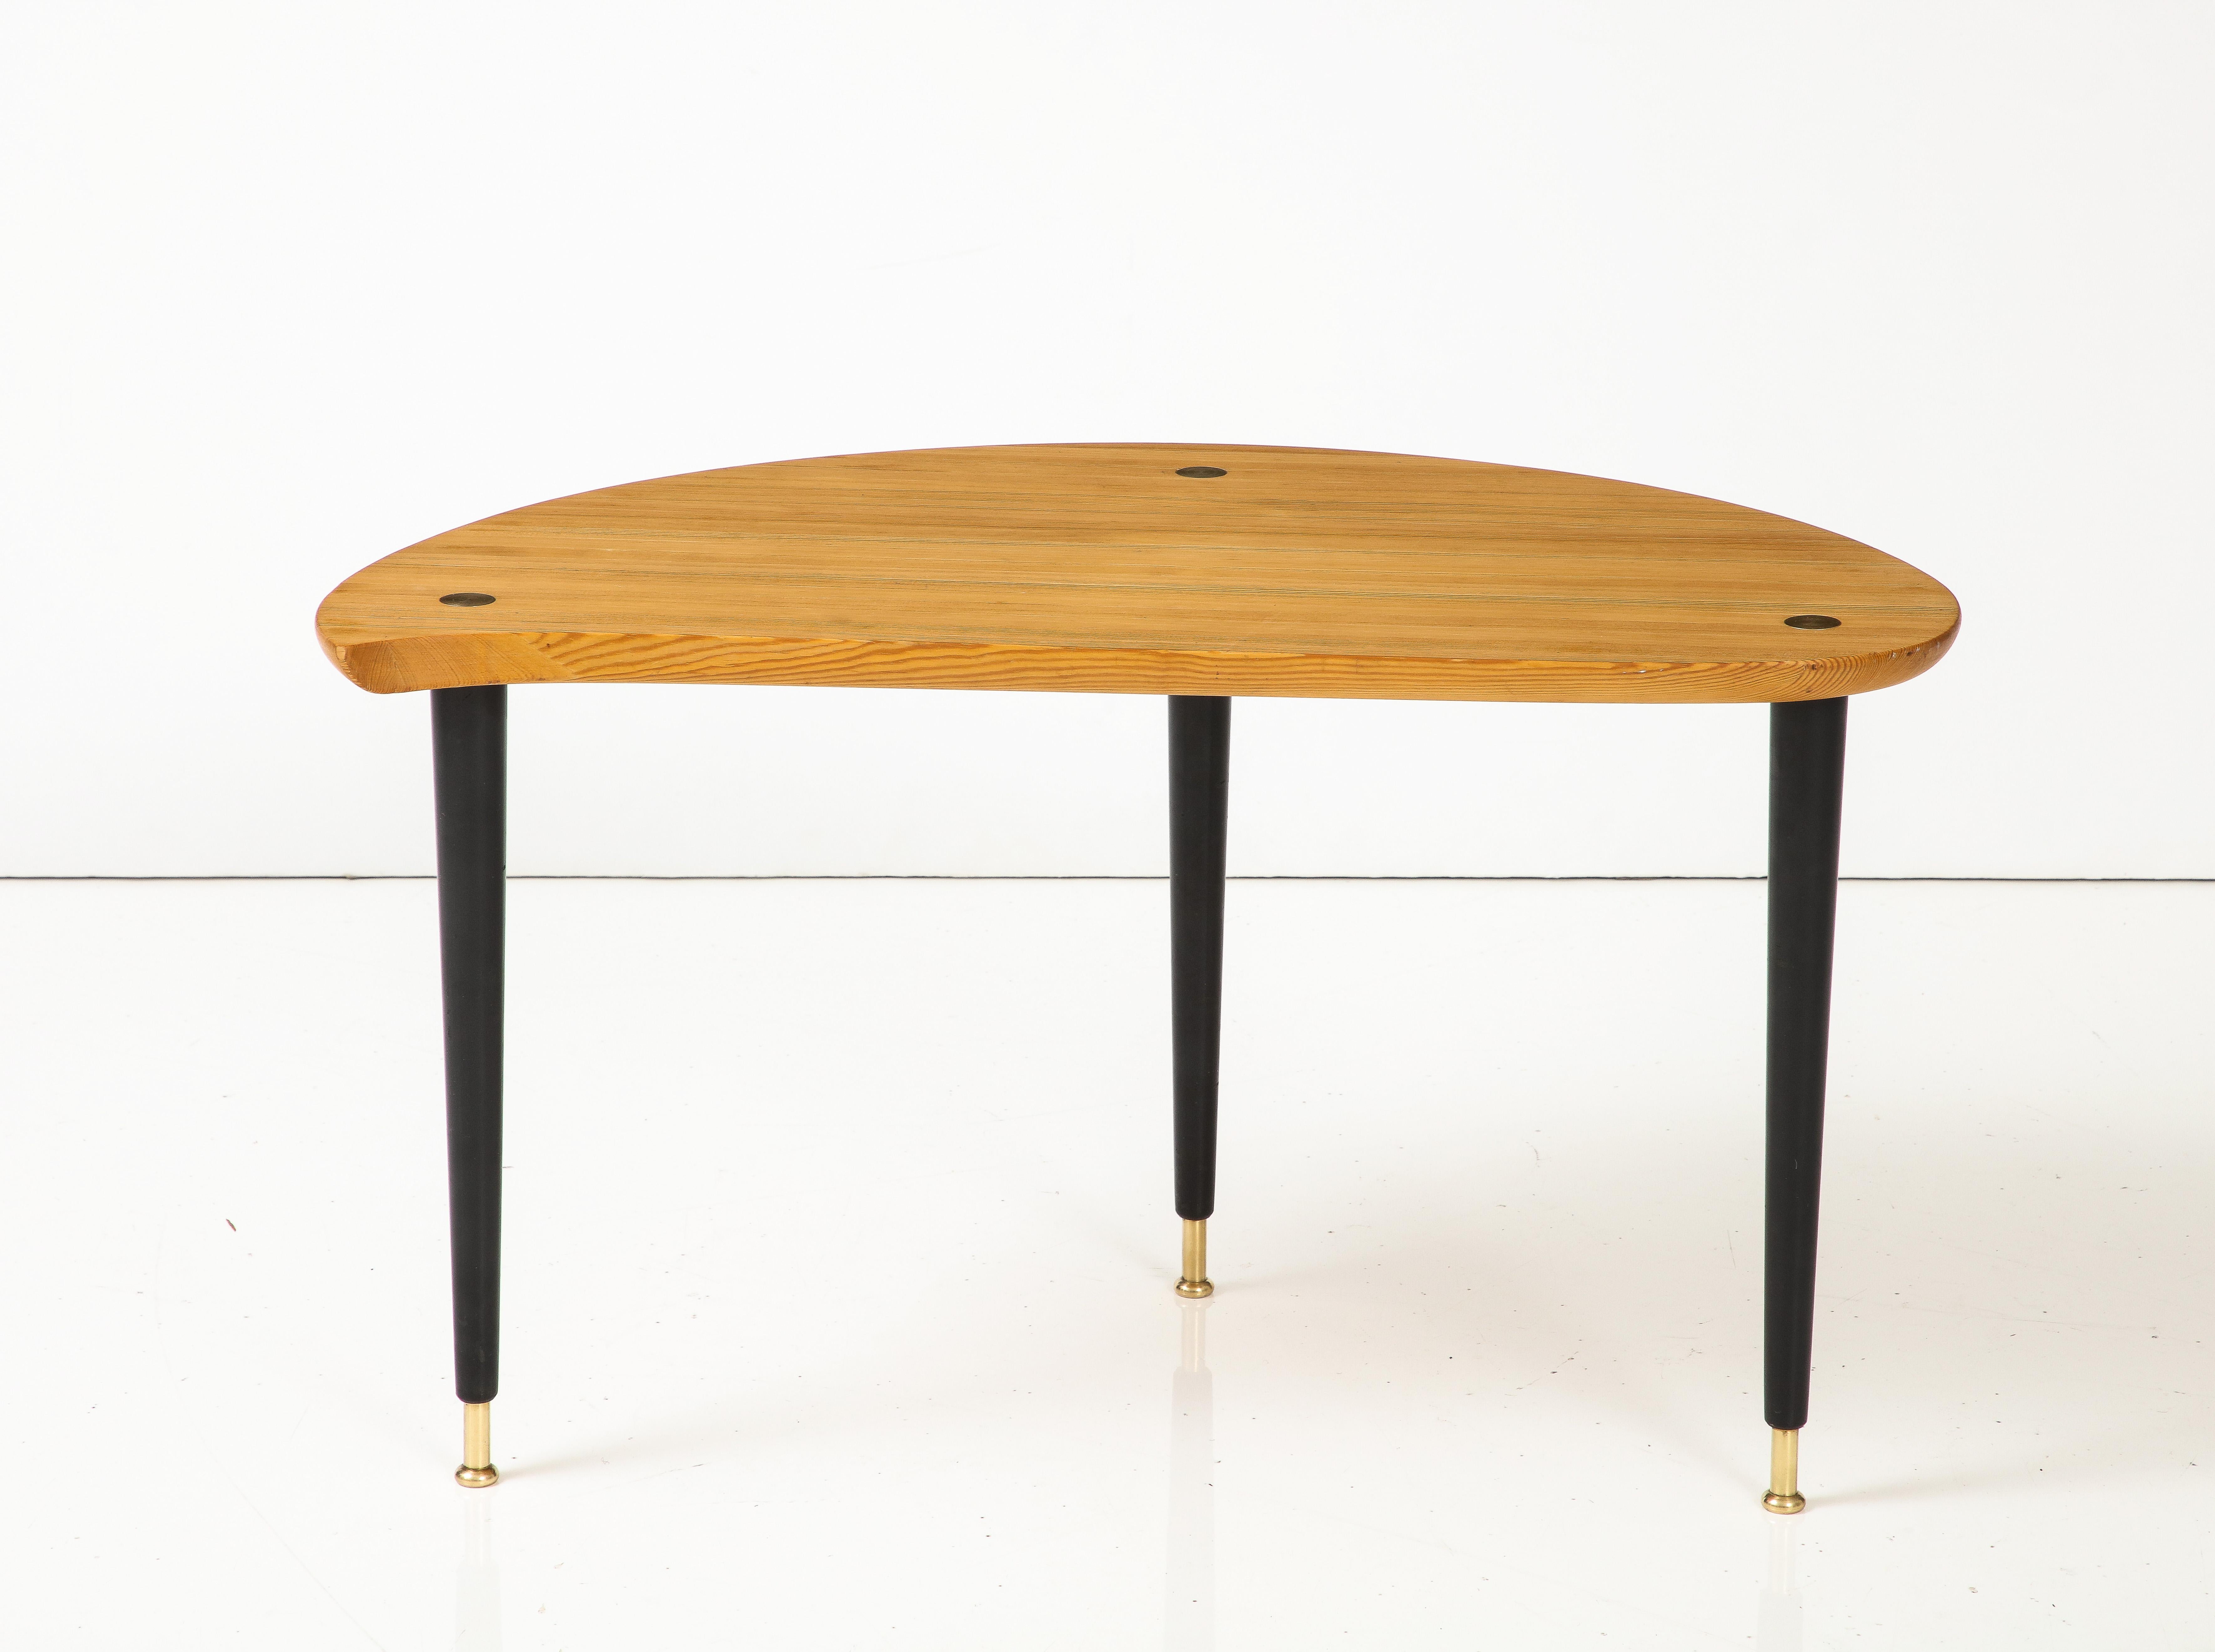 A Swedish pine and ebonozed table with brass details, produced by Karl Andersson & Söner, Huskvarna. Sold under the product line called Svensk Fur, the asymmetric pine top raised on ebonized legs headed and ending with brass details.
Designed by